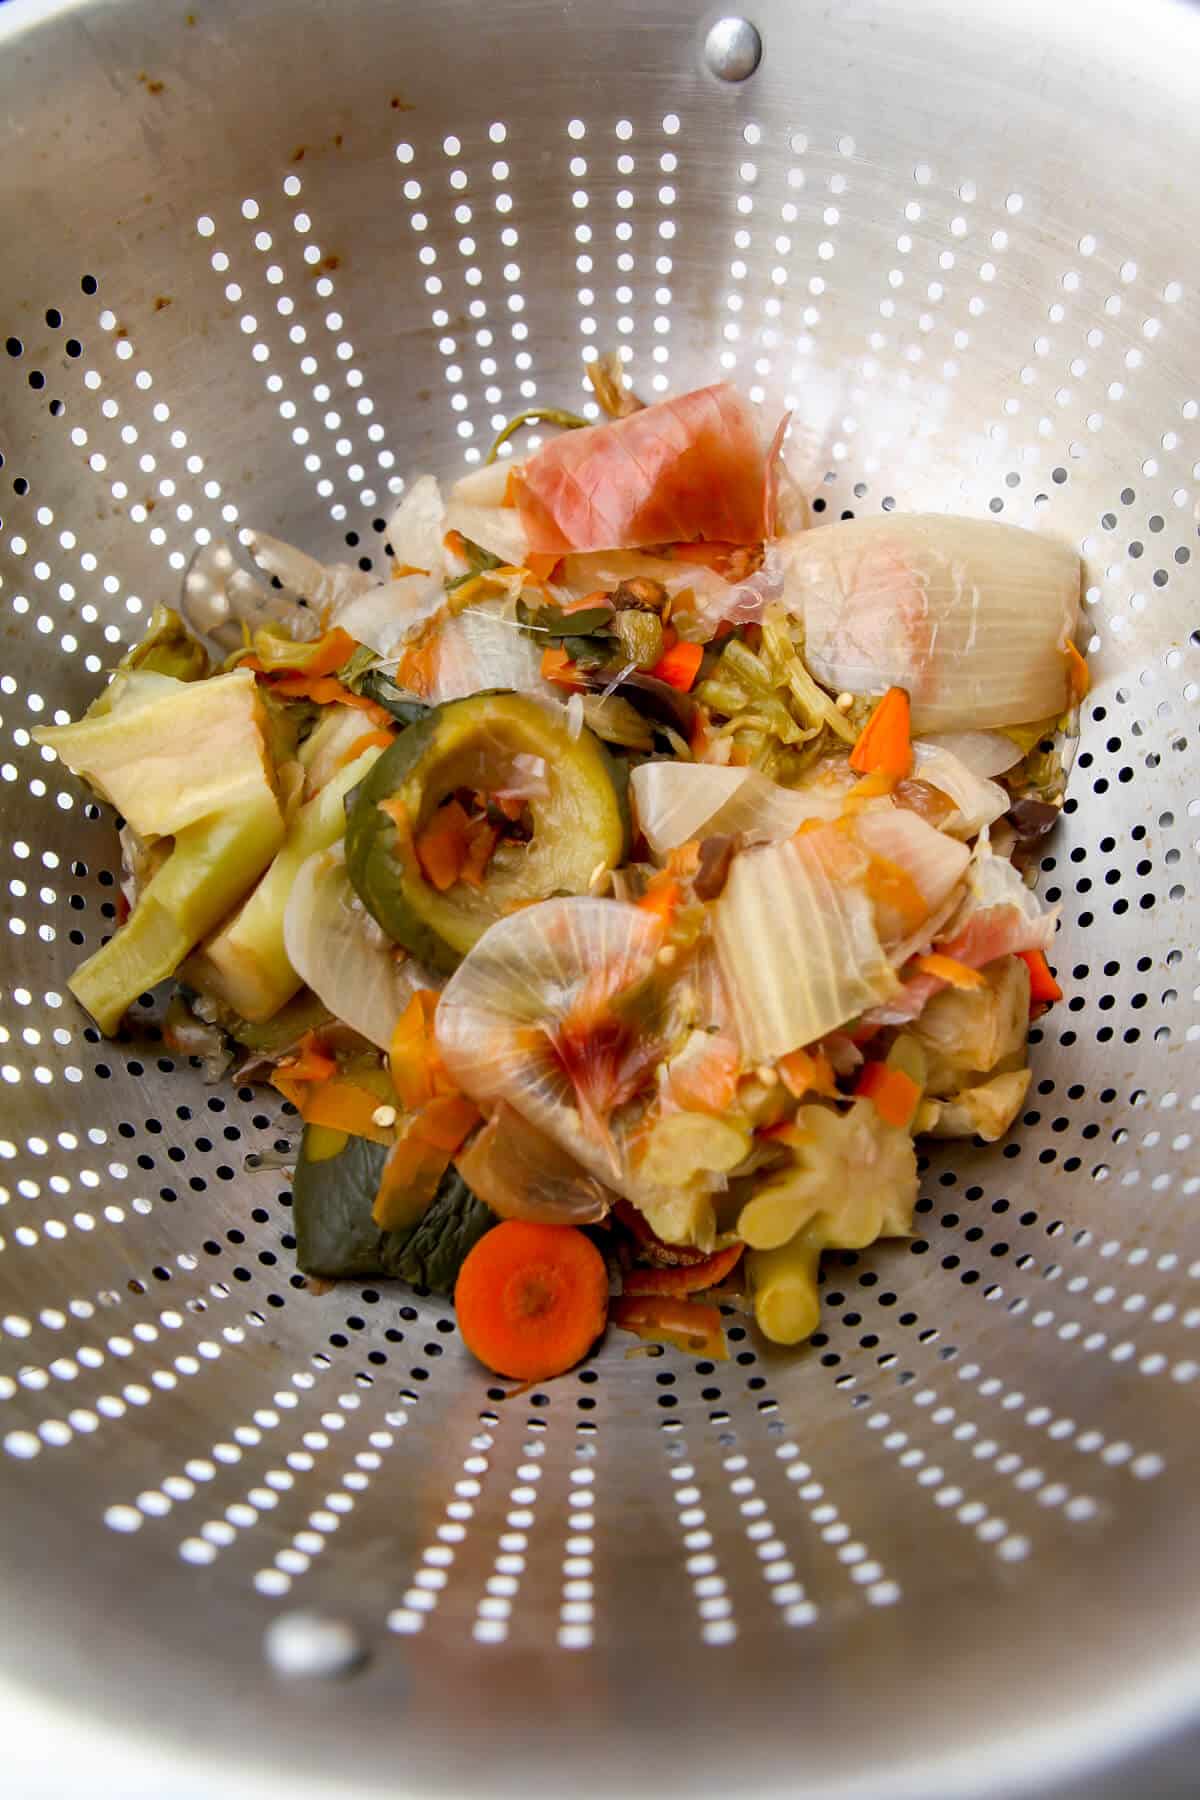 Vegetable scraps in a strainer after they have been boiled down to make broth.